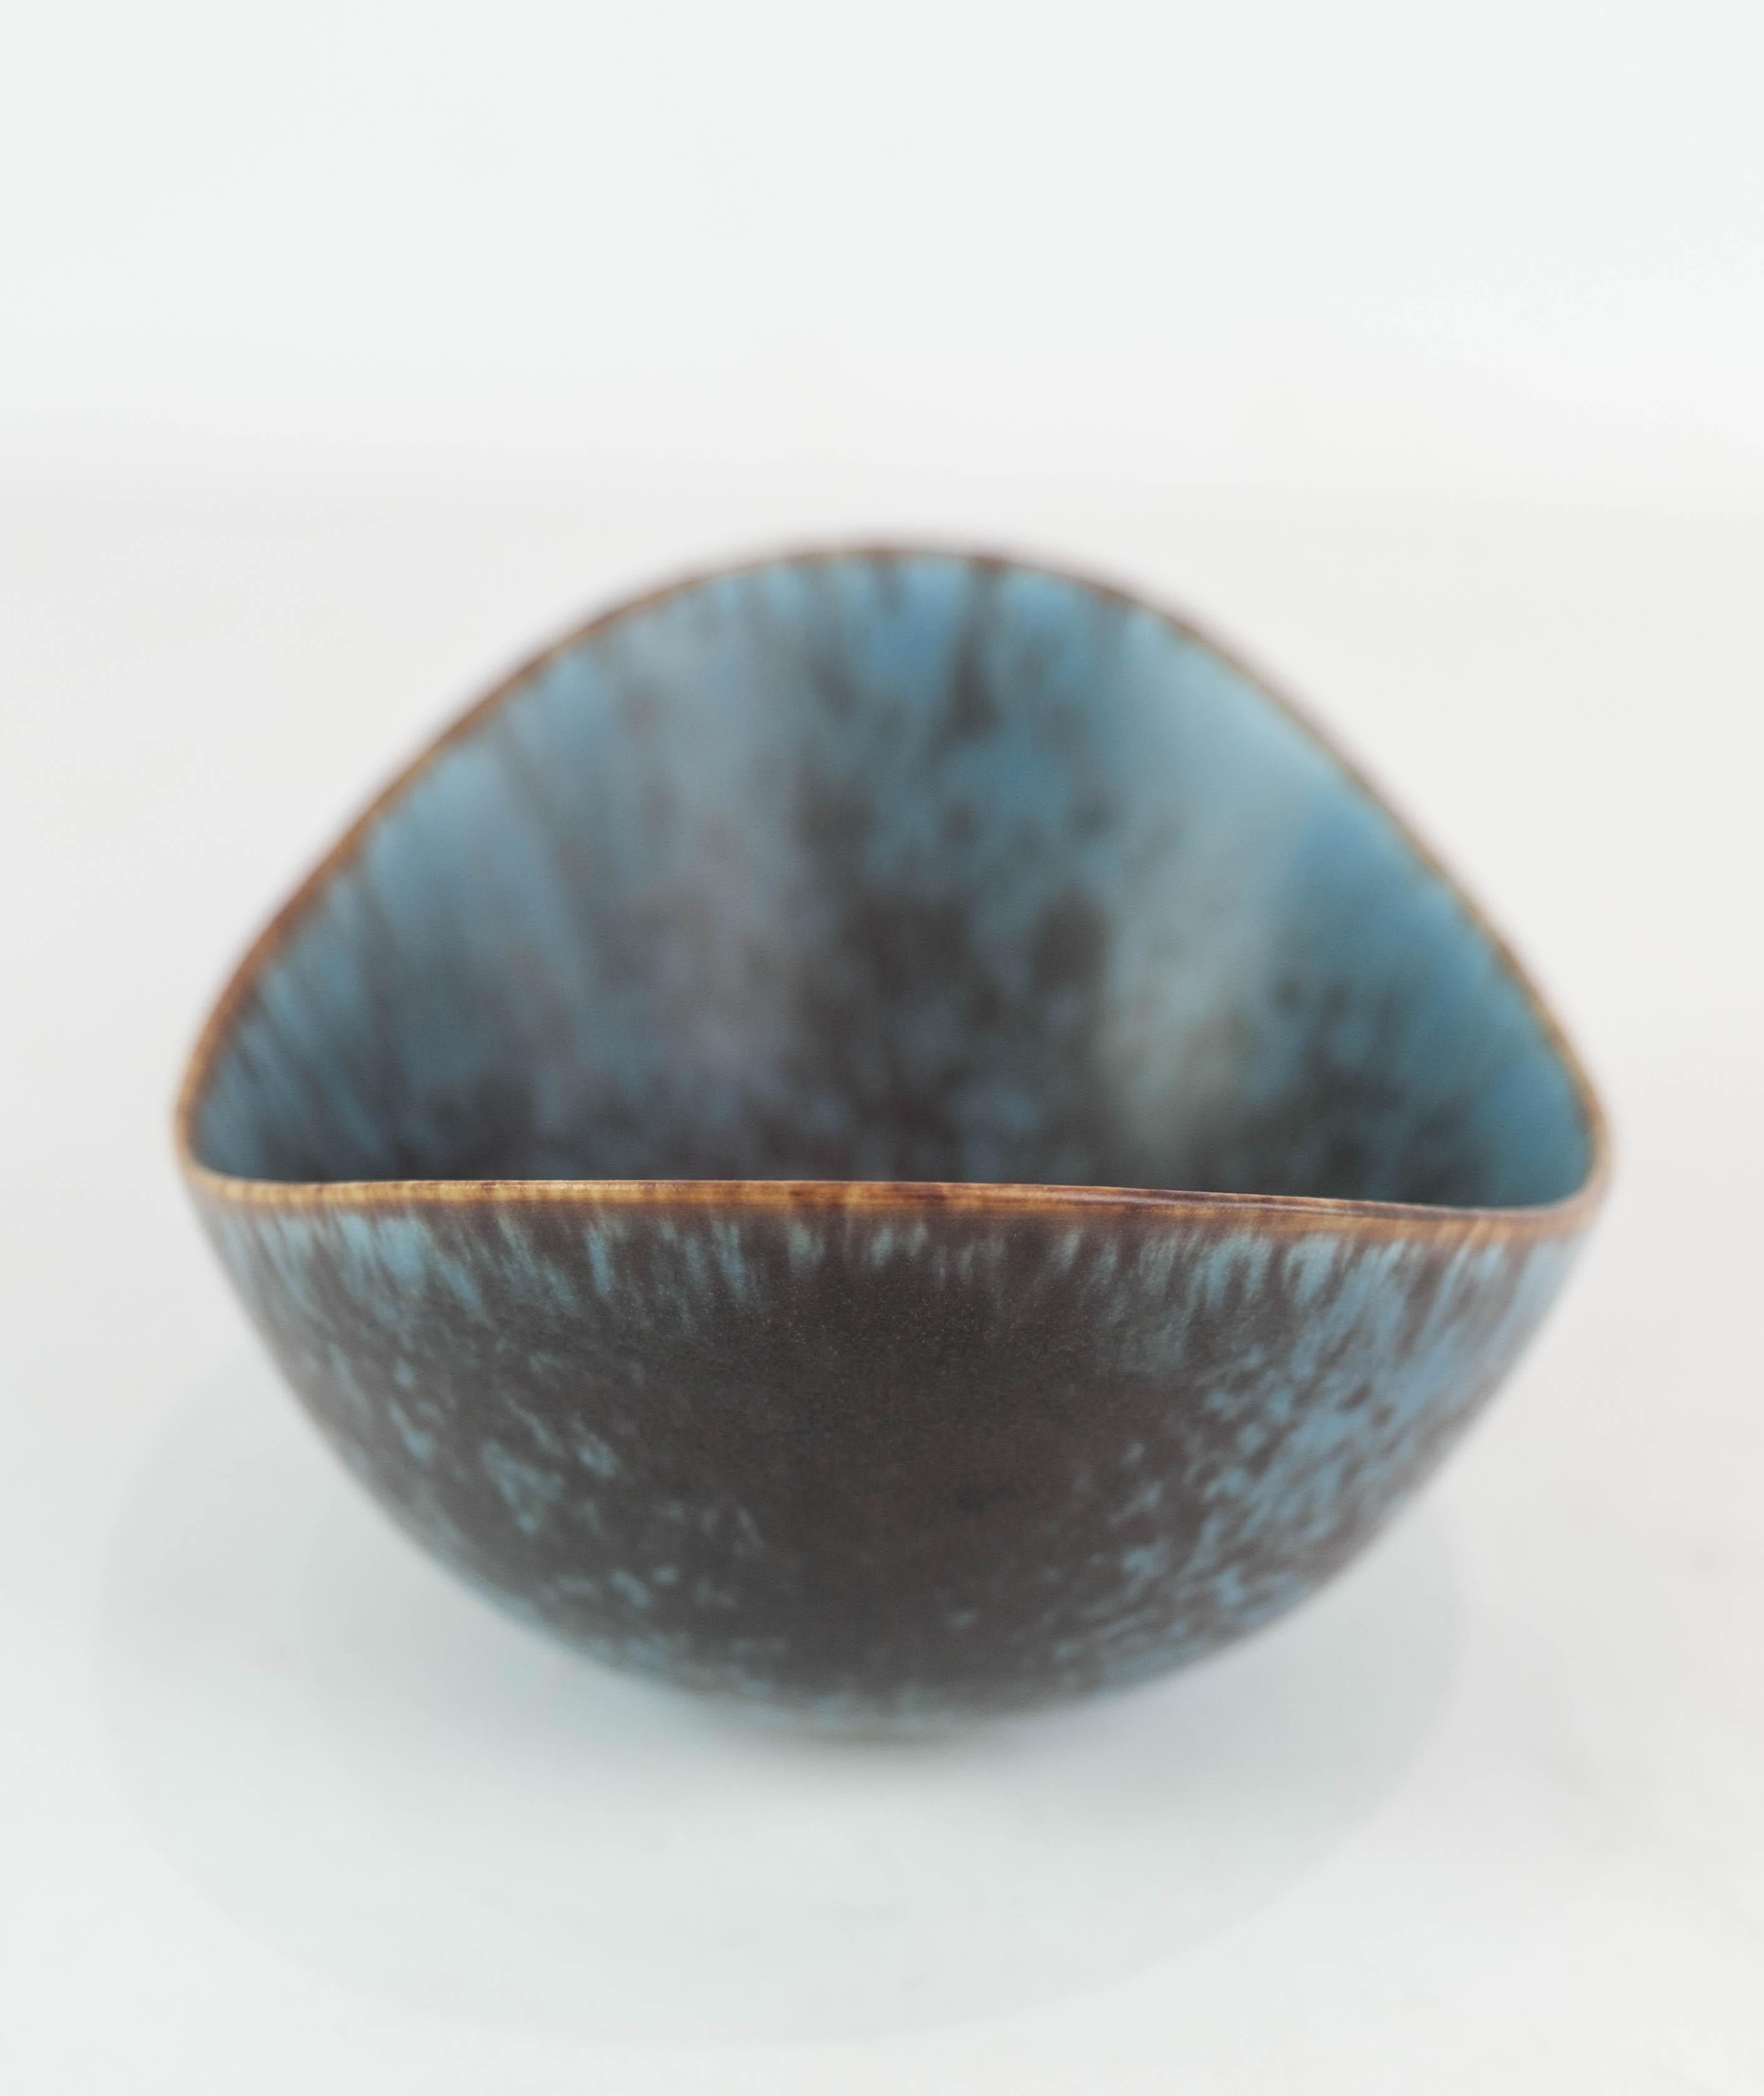 Ceramic Bowl with Blue and Brown Glace by the Artist Gunnar Nylund for Rørstrand 2